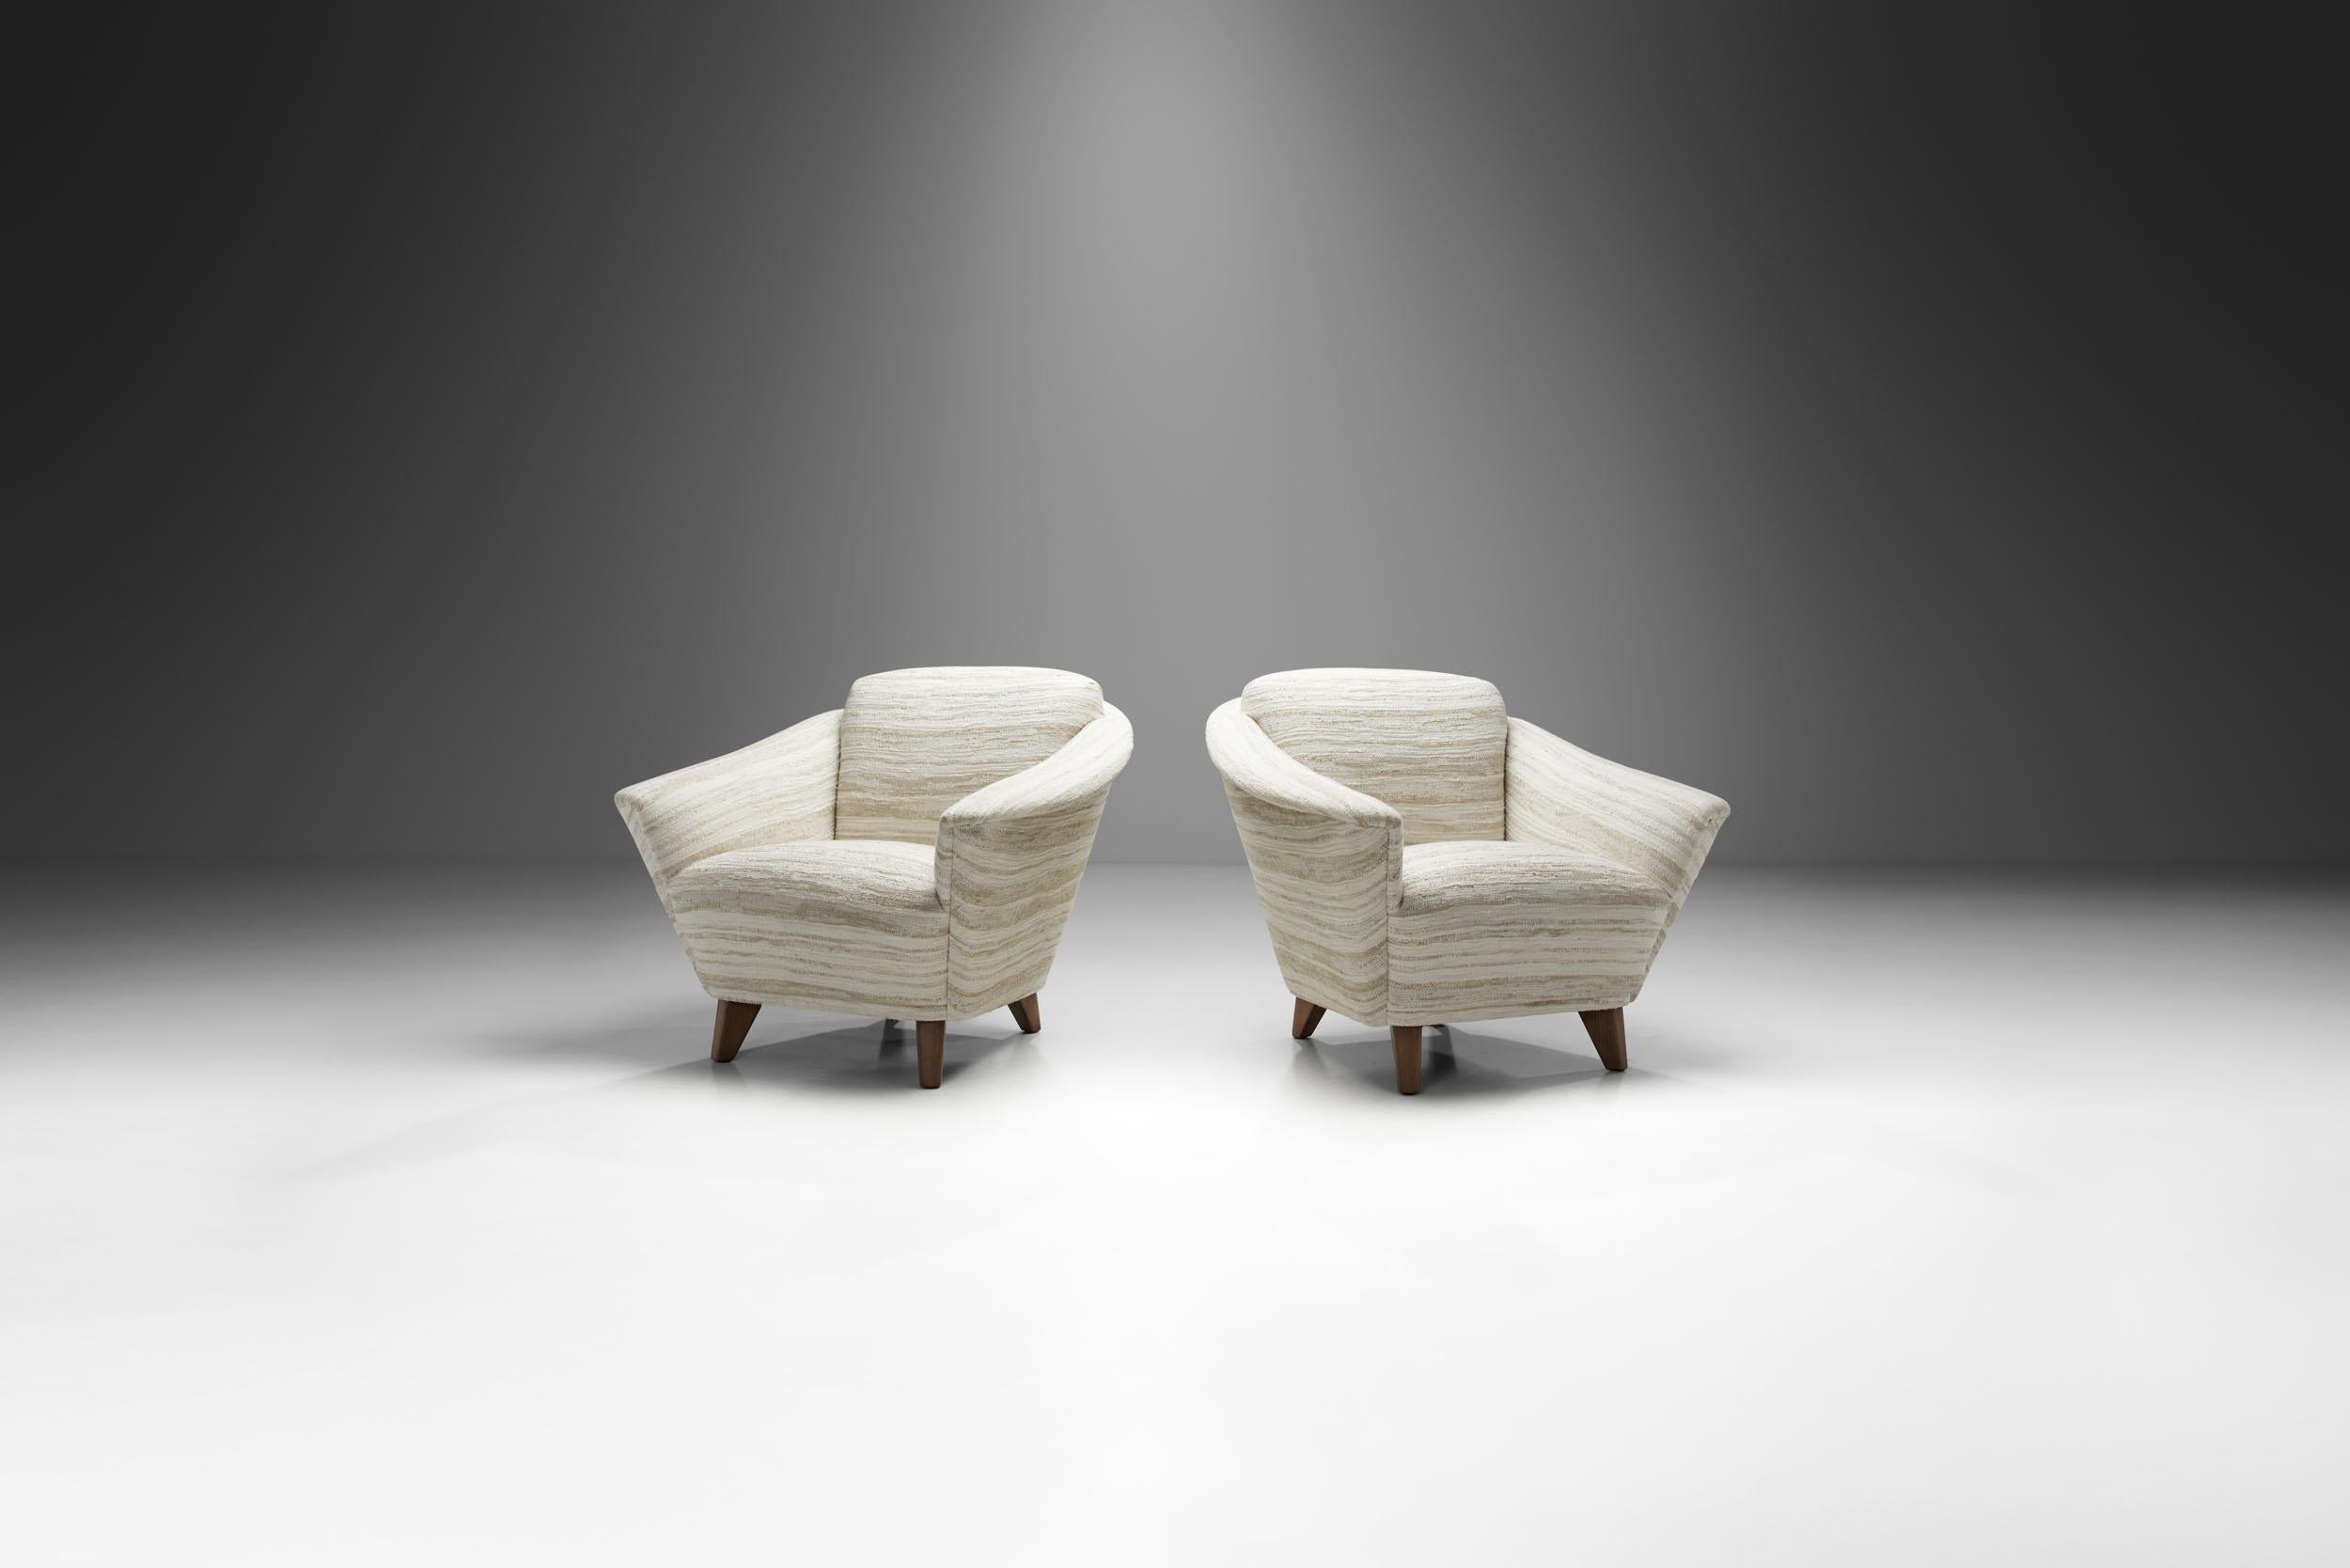 This pleasantly peculiar pair of lounge chairs by the famous manufactory, Wilhelm Knoll, is a stunning reminder that German design played an important role in the history of furniture design. From the Thonet chair to the Bauhaus, post-war German